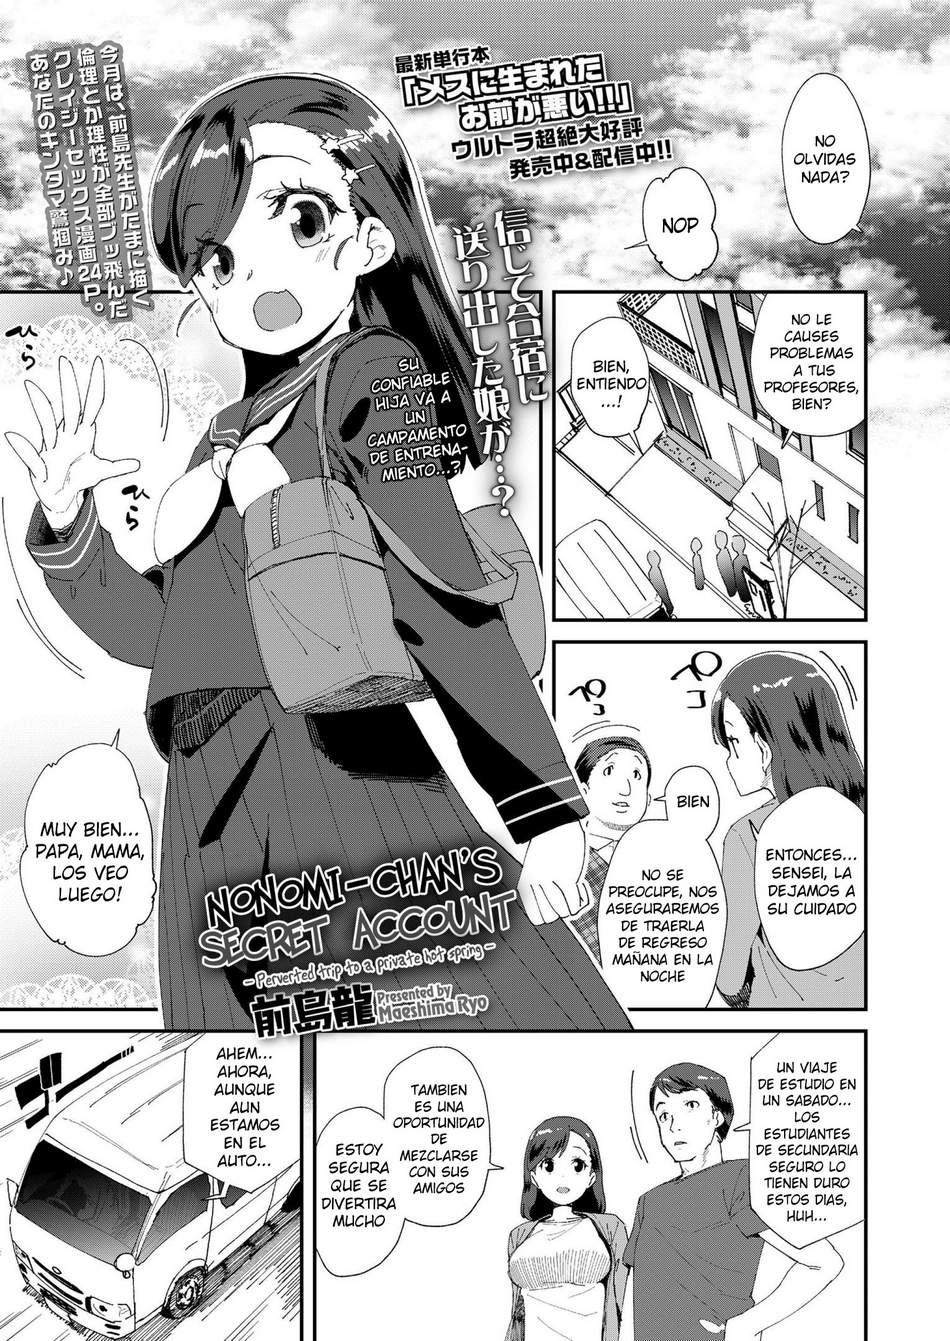 Nonomi-chan’s Secret Account -Perverted Trip to a Private Hotspring- - Page #1